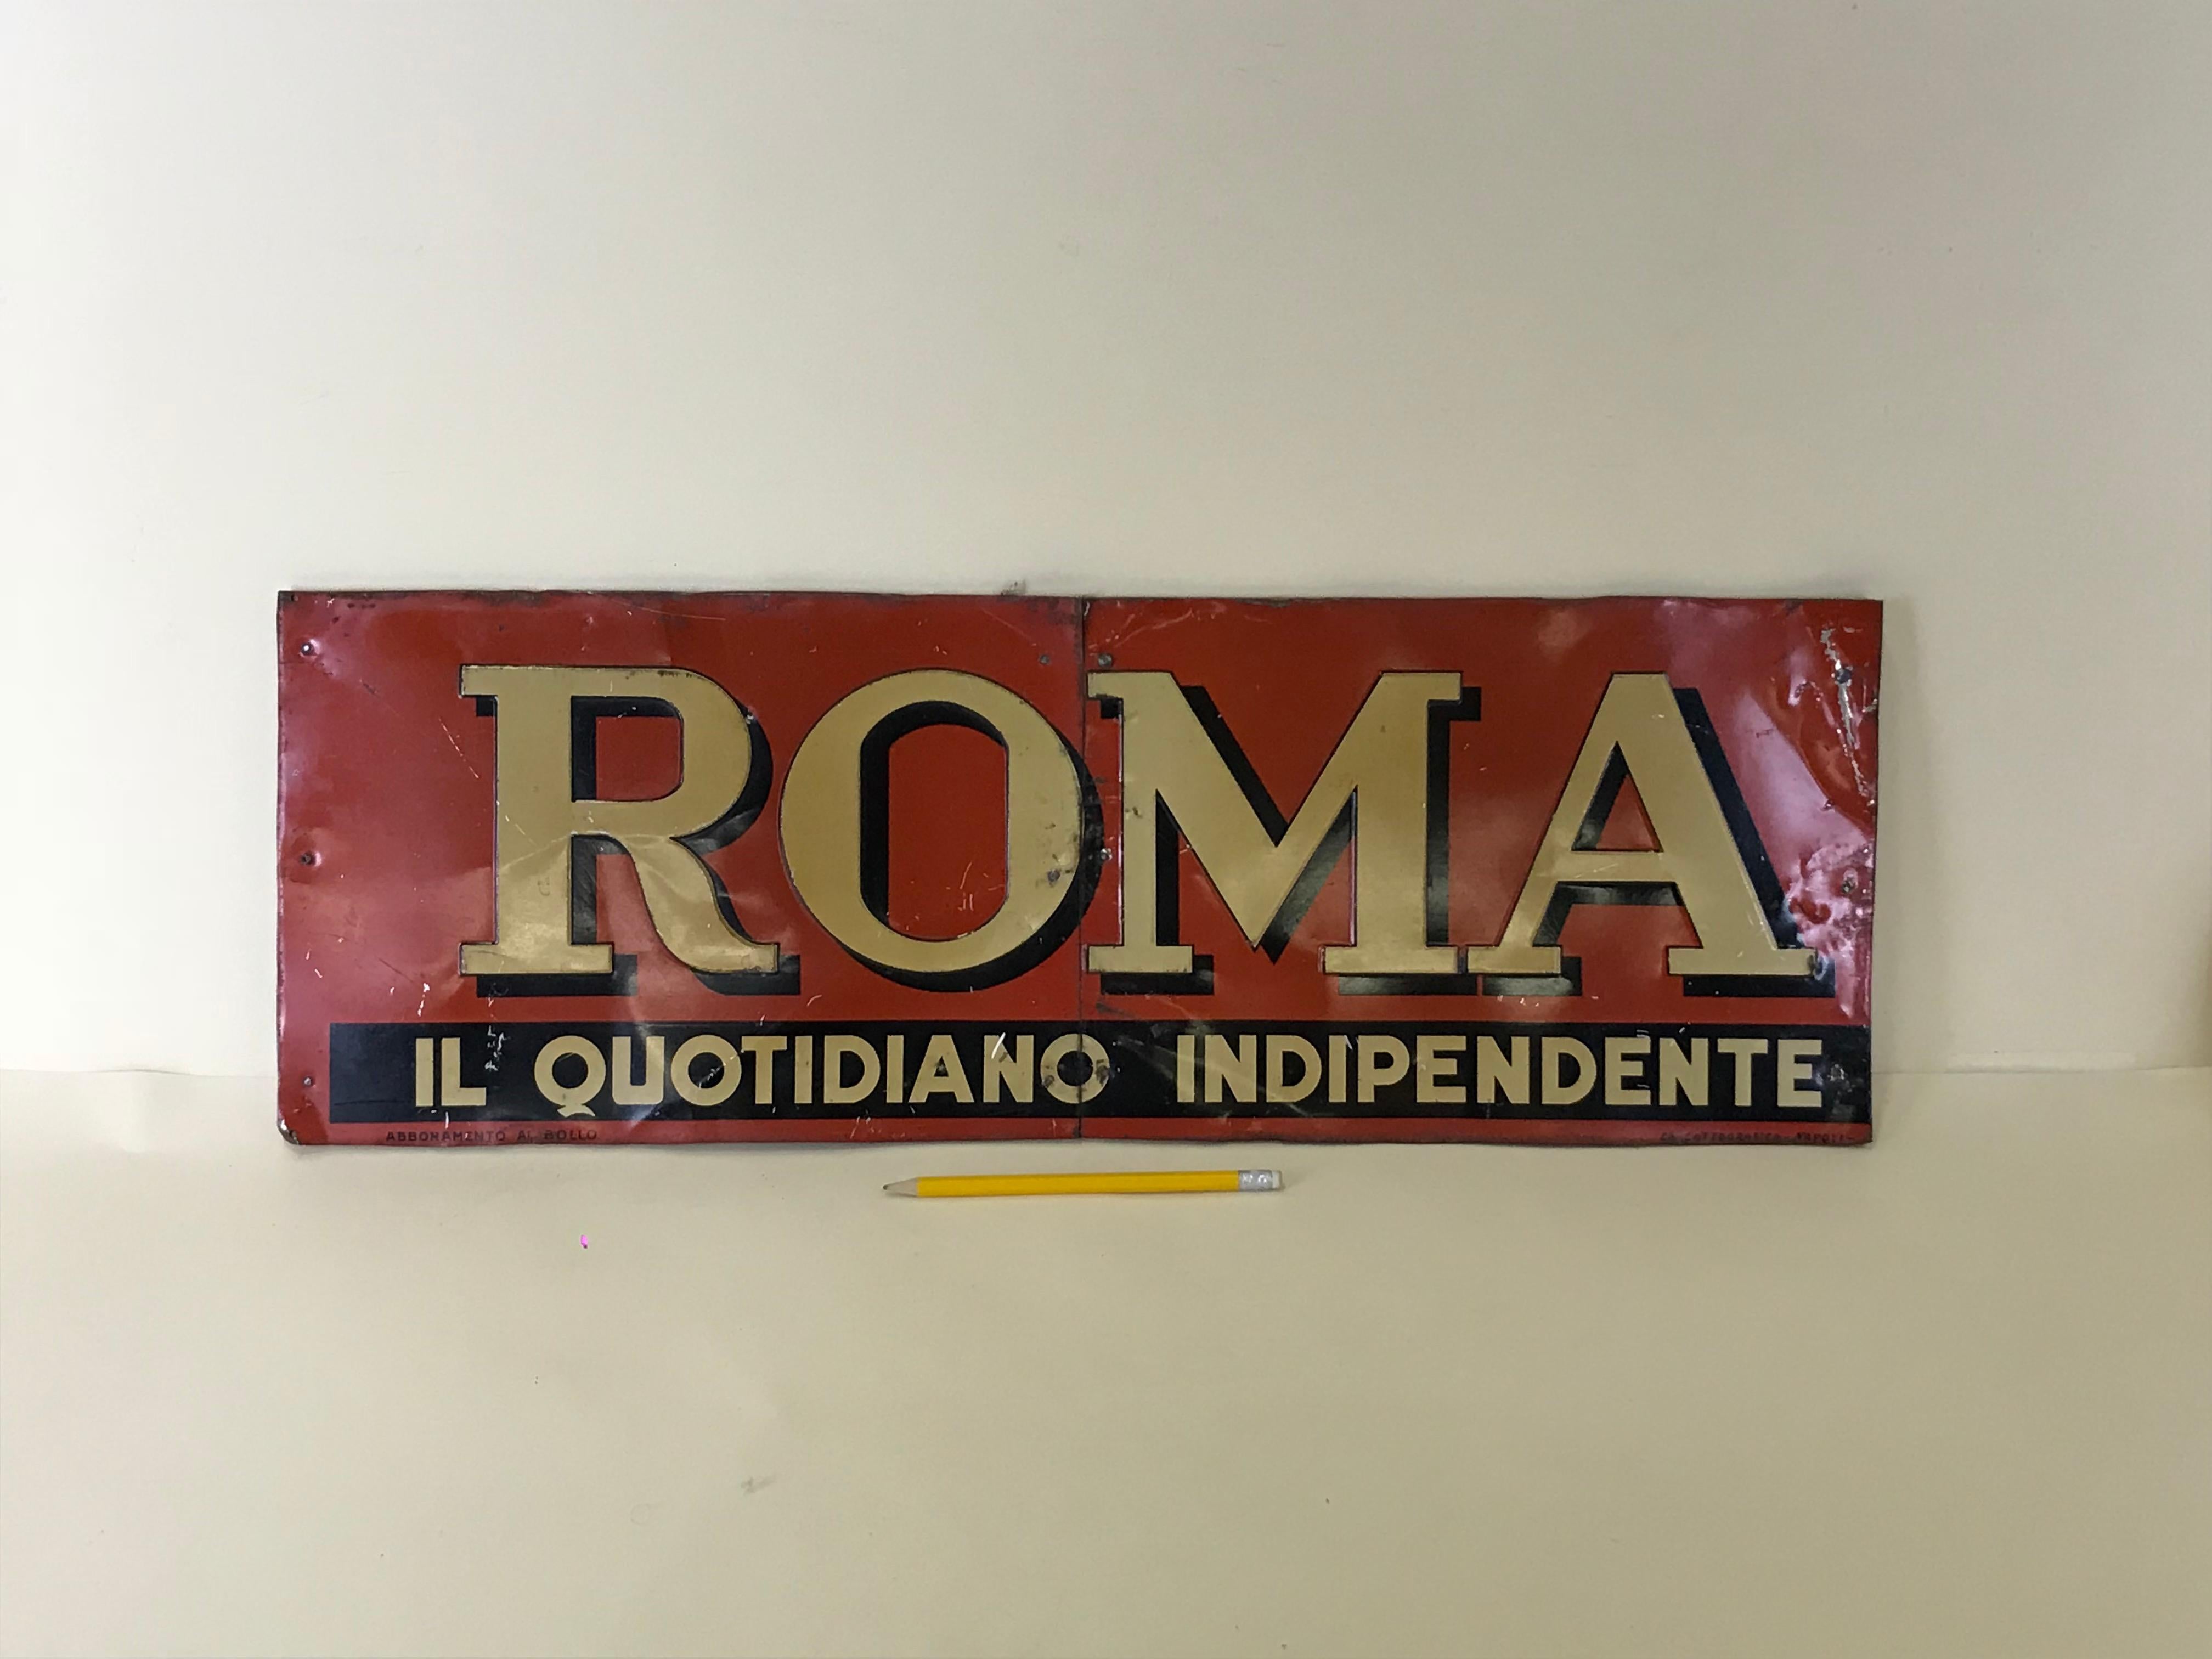 Mid-Century Modern 1950s Italian Vintage Transferpinted Red and Cream Roma Newspaper Sign